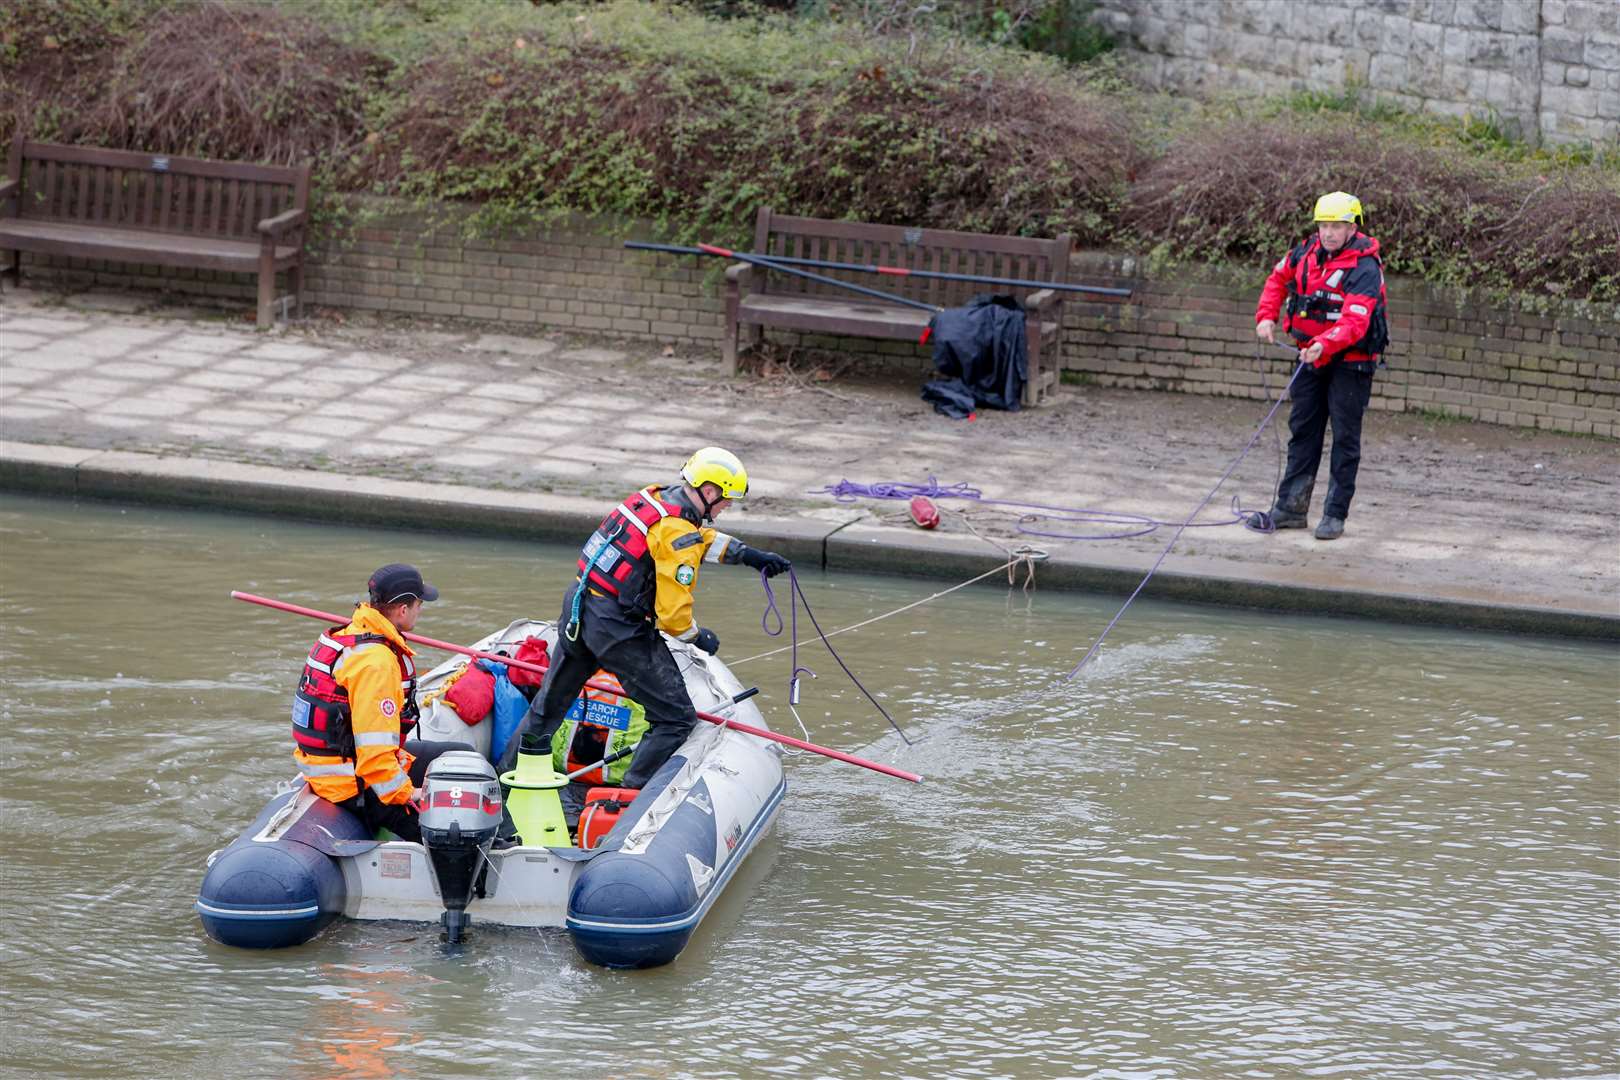 The search and rescue team on the River Medway